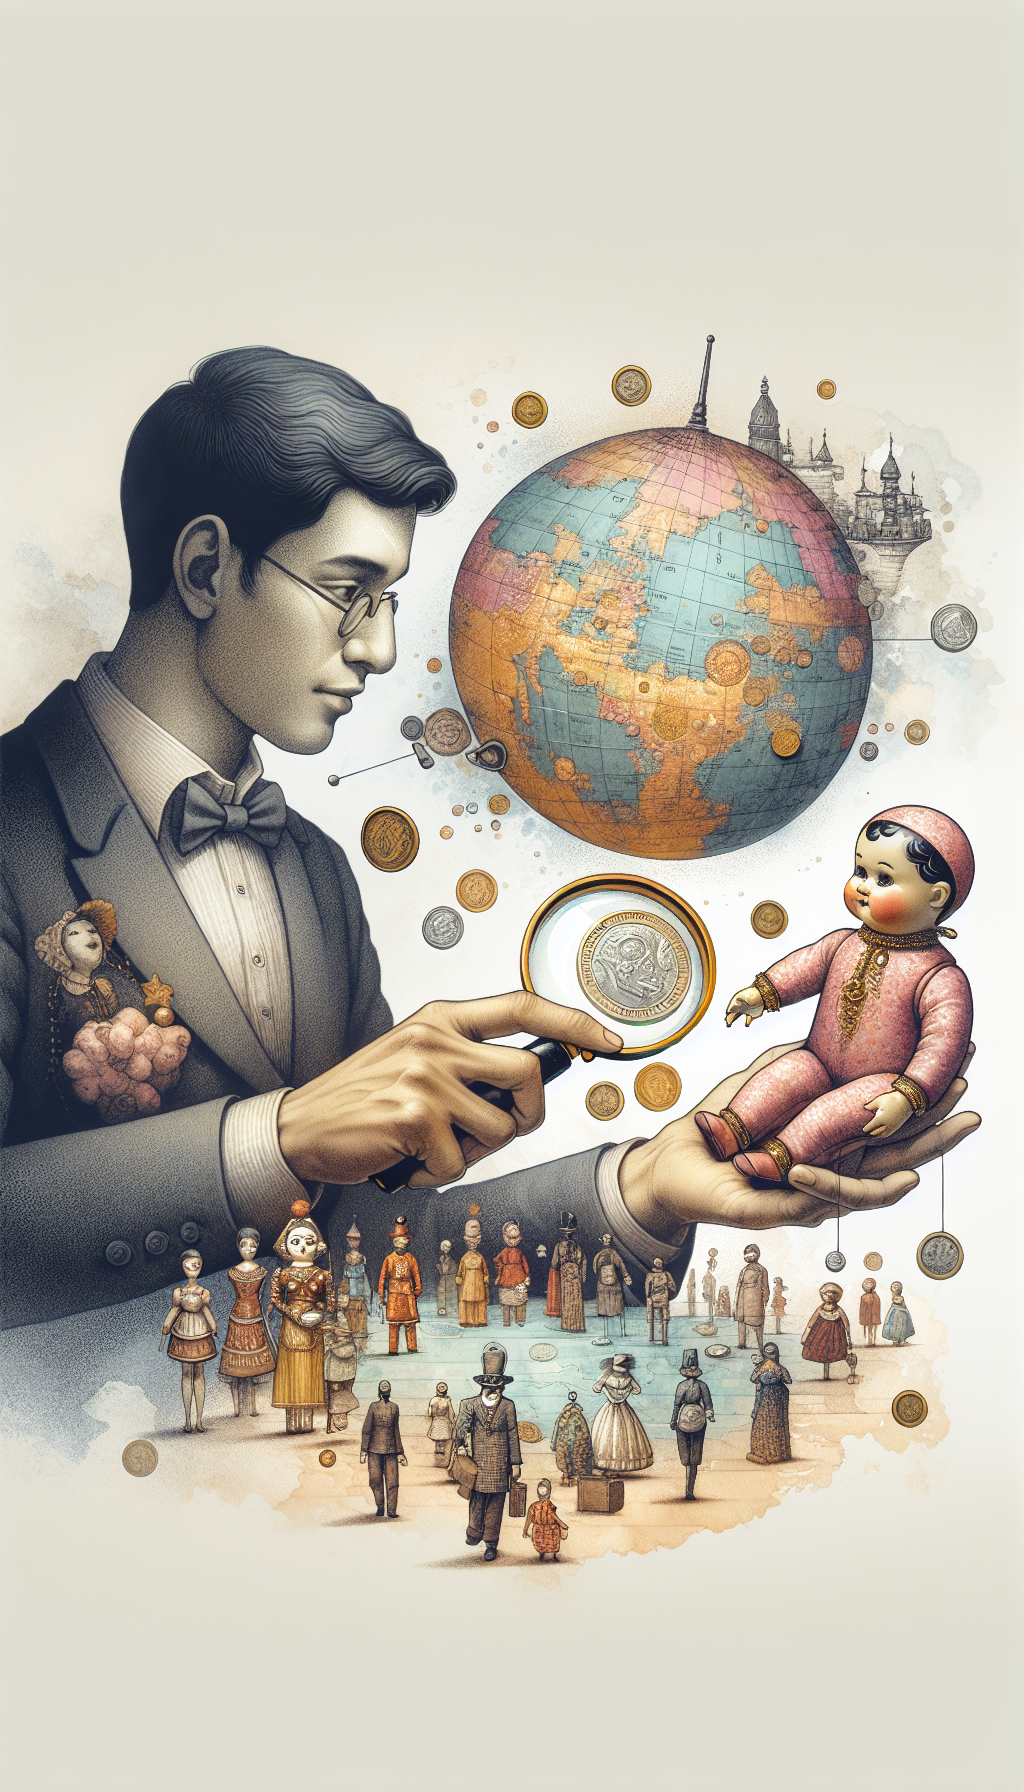 In the illustration, a nostalgic person holds an antique doll while a magnifying glass, symbolizing appraisal, hovers over it, revealing glinting coins within the doll. An ethereal map unfolds below, dotted with tiny vintage dolls representing expert locations. The artwork blends whimsical watercolors with crisp, digital lines, creating a bridge between cherished past and lucrative future.